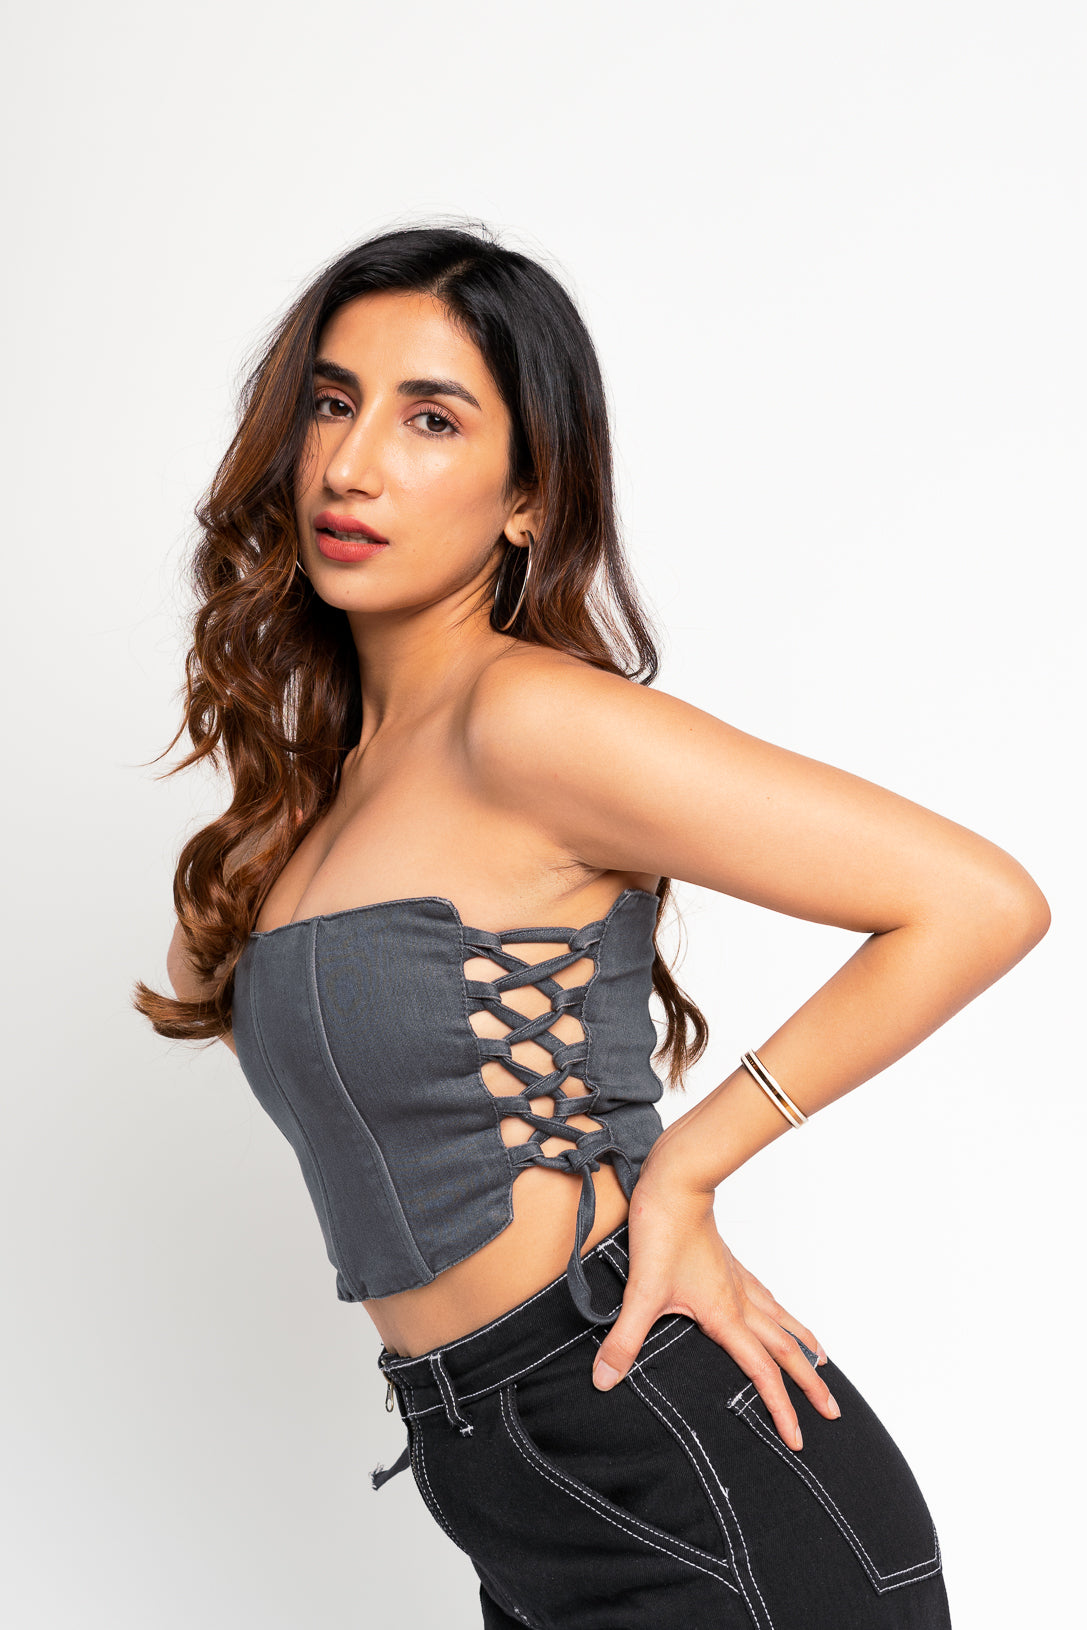 Buy Black Loni Lace Bustier Top - Forever New